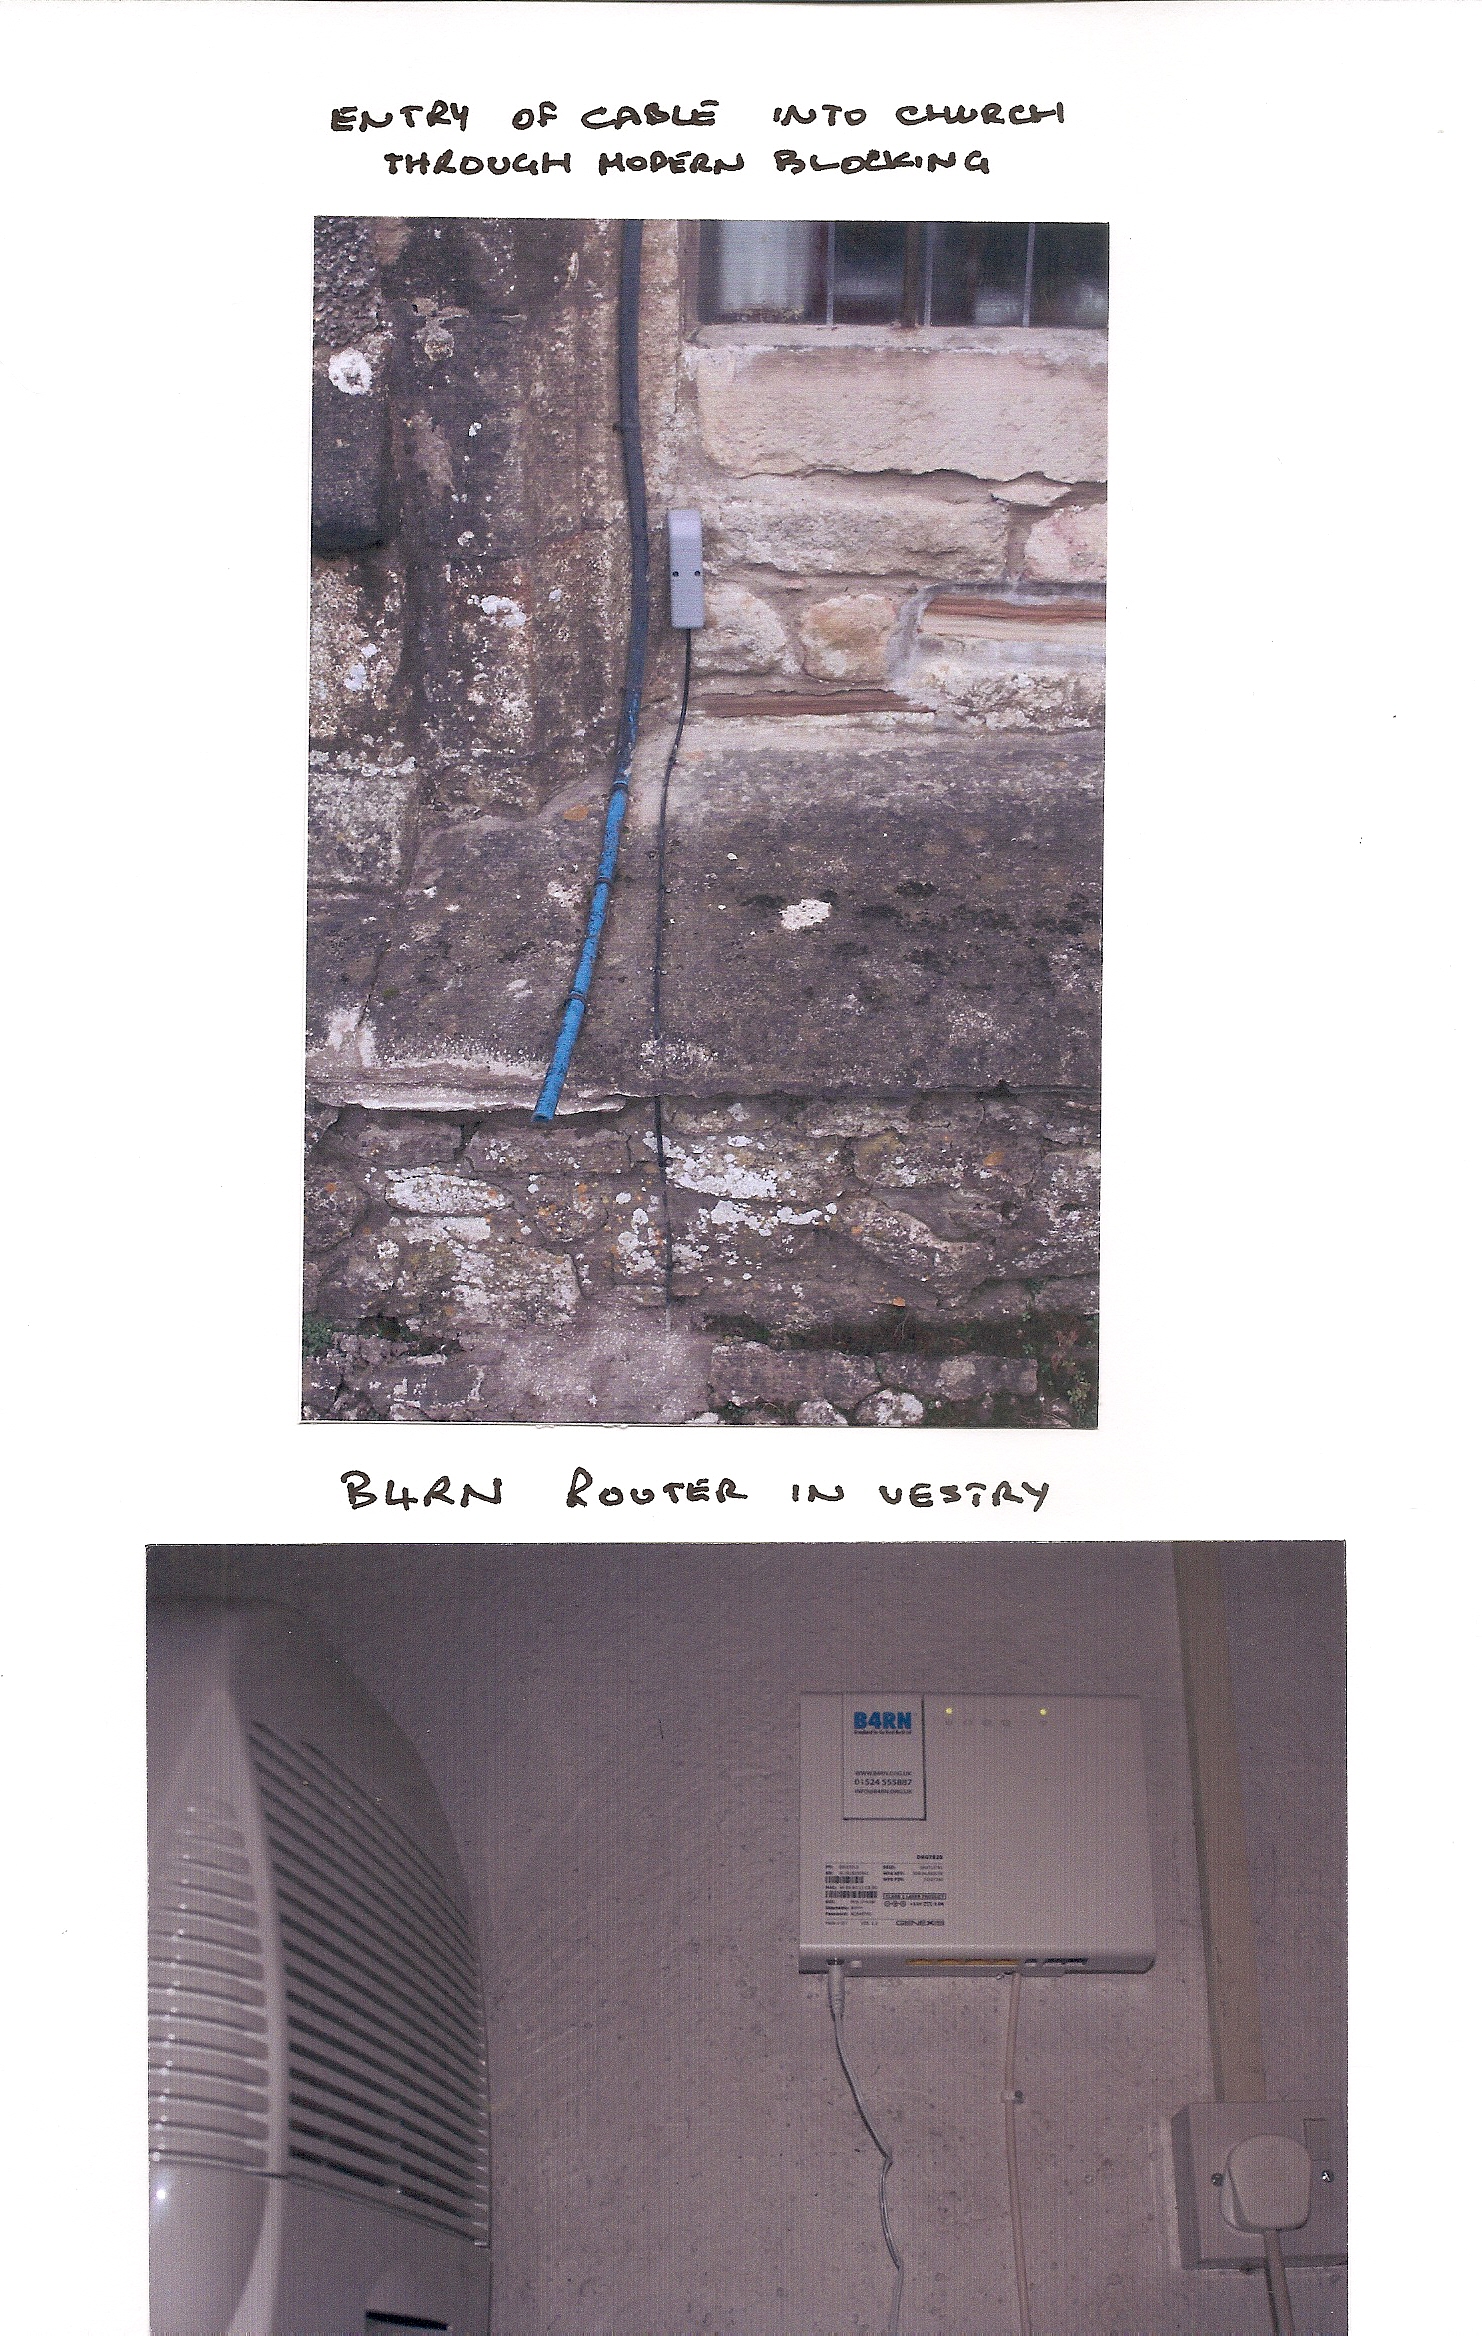 Entry of cable into church and location of router in vestery